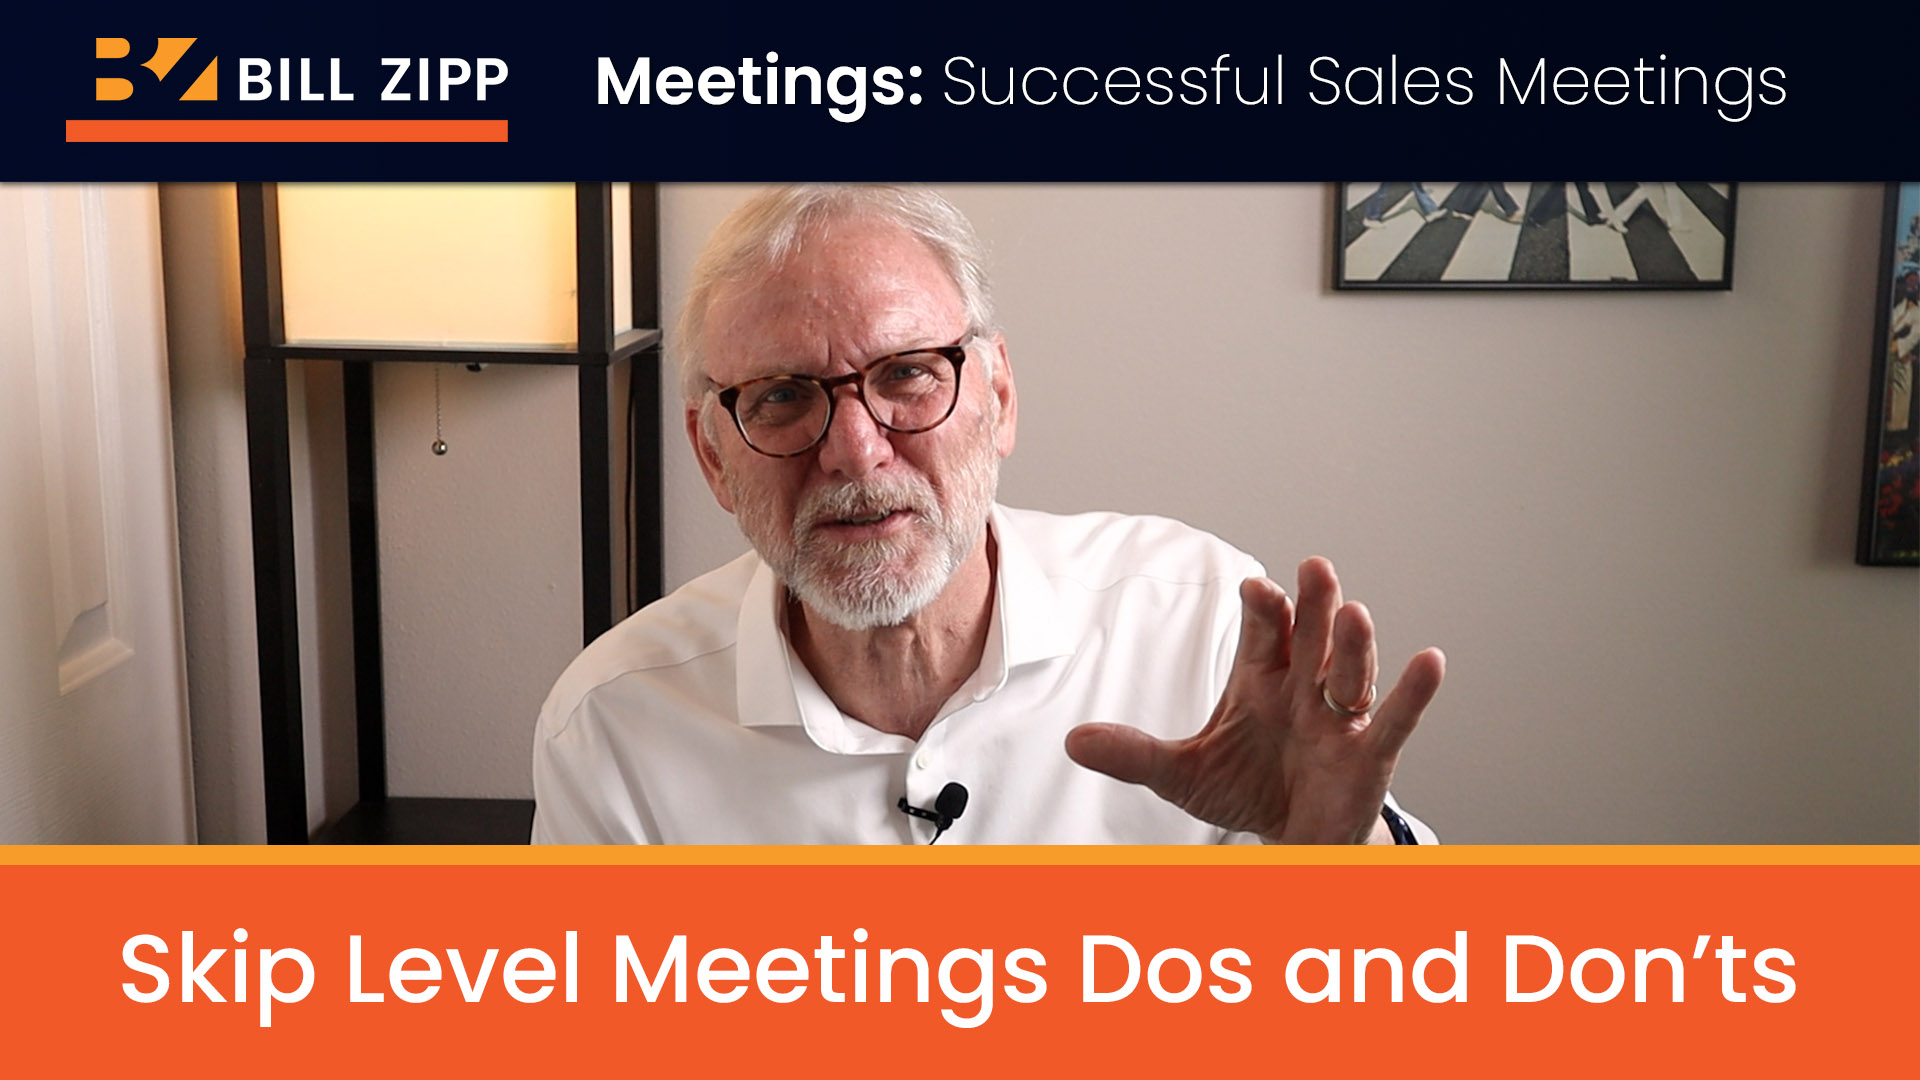 Skip Level Meeting Dos and Don’ts: Successful Skip Level Meetings